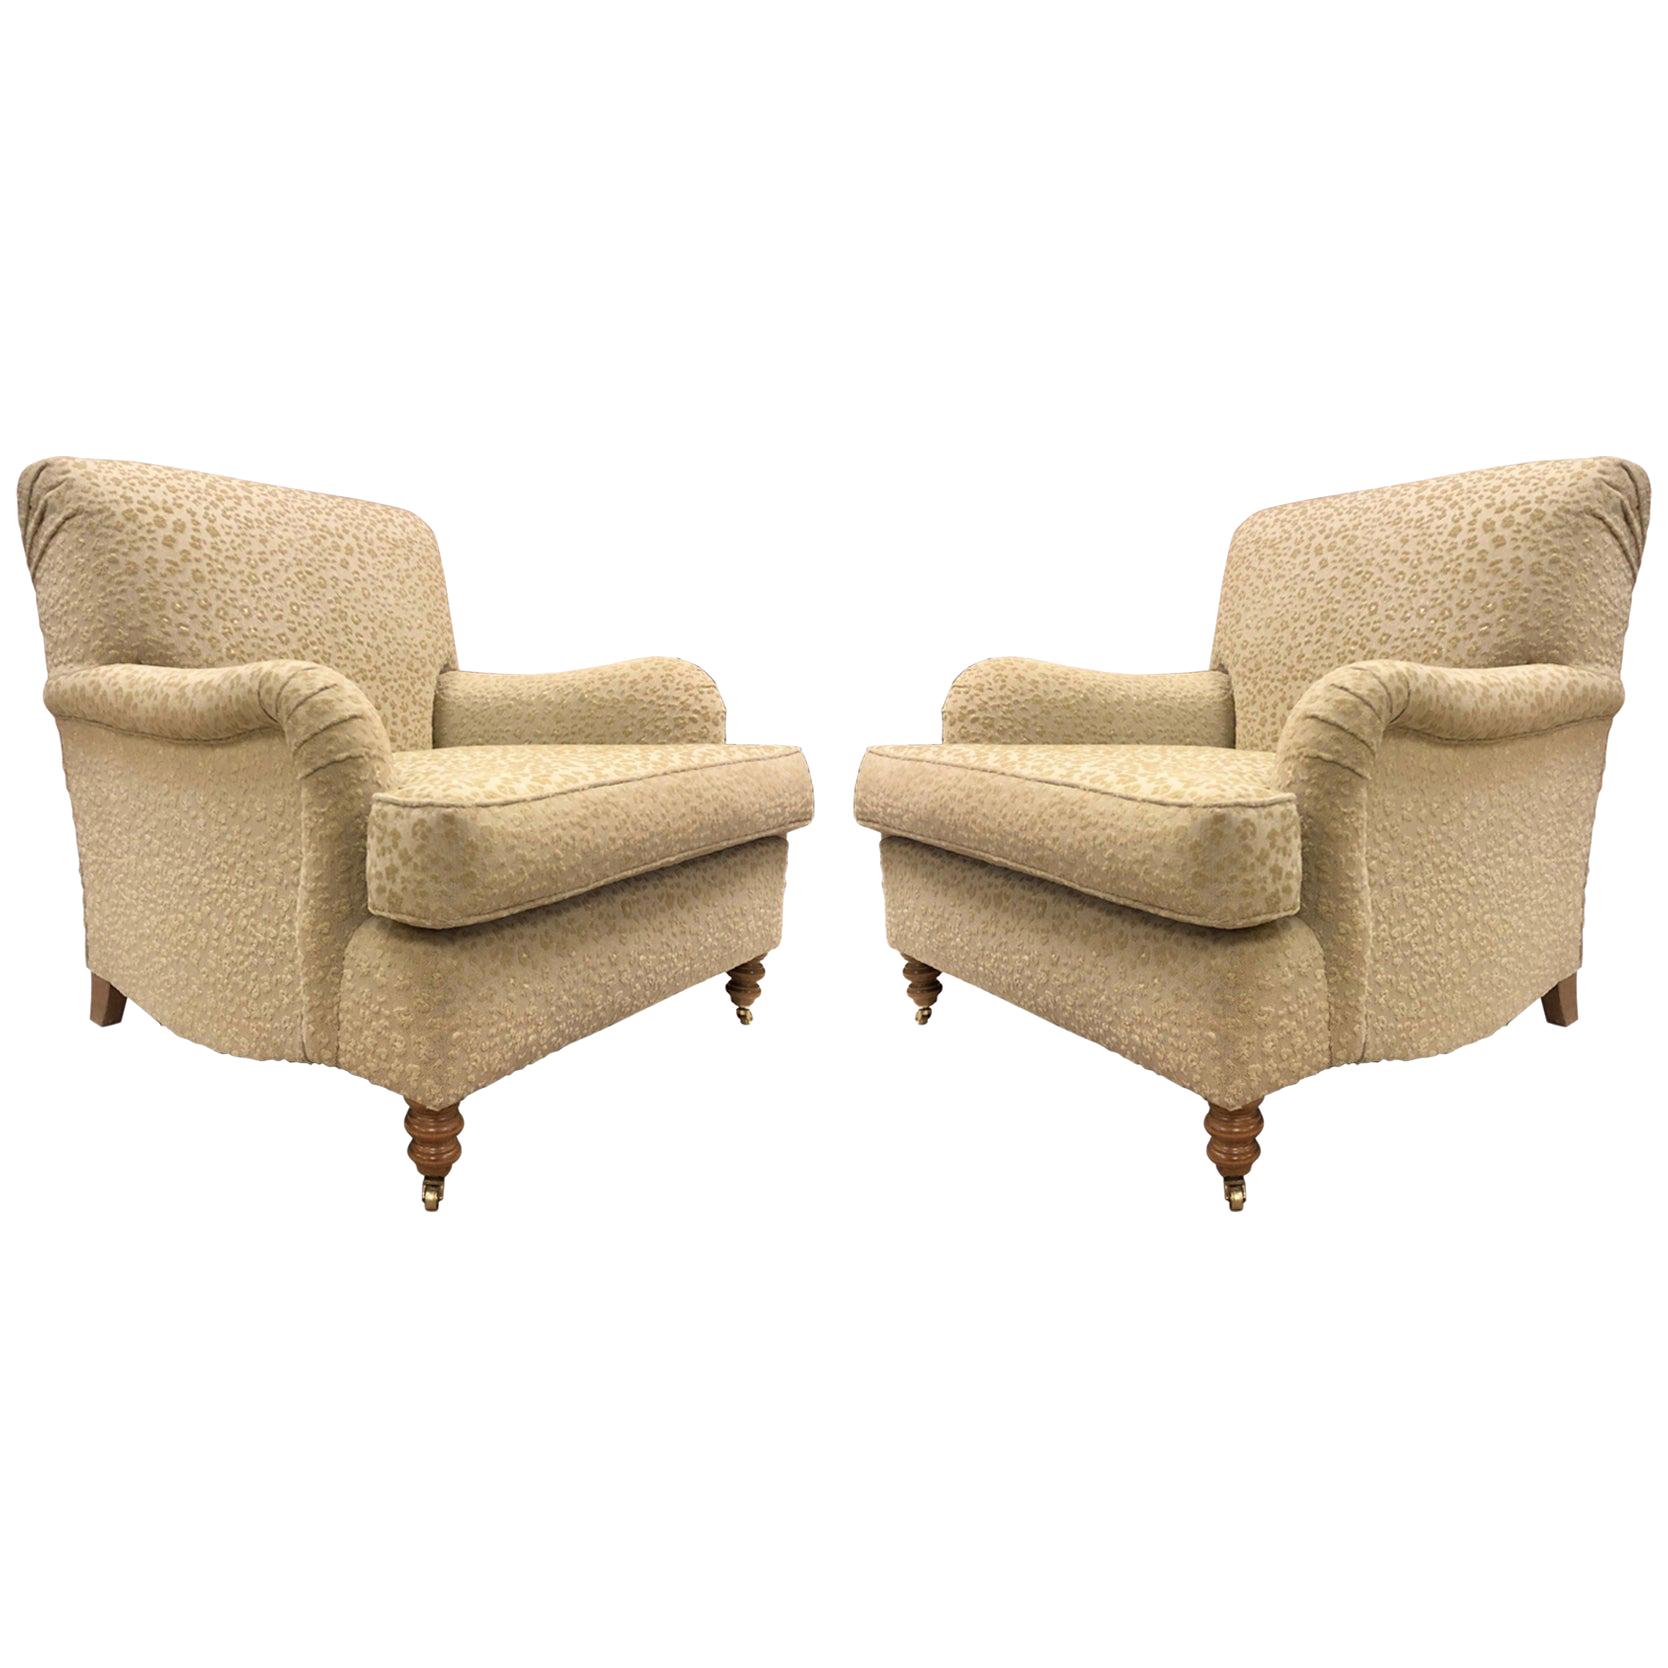 Pair of English Oversized Upholstered Lounge Chairs